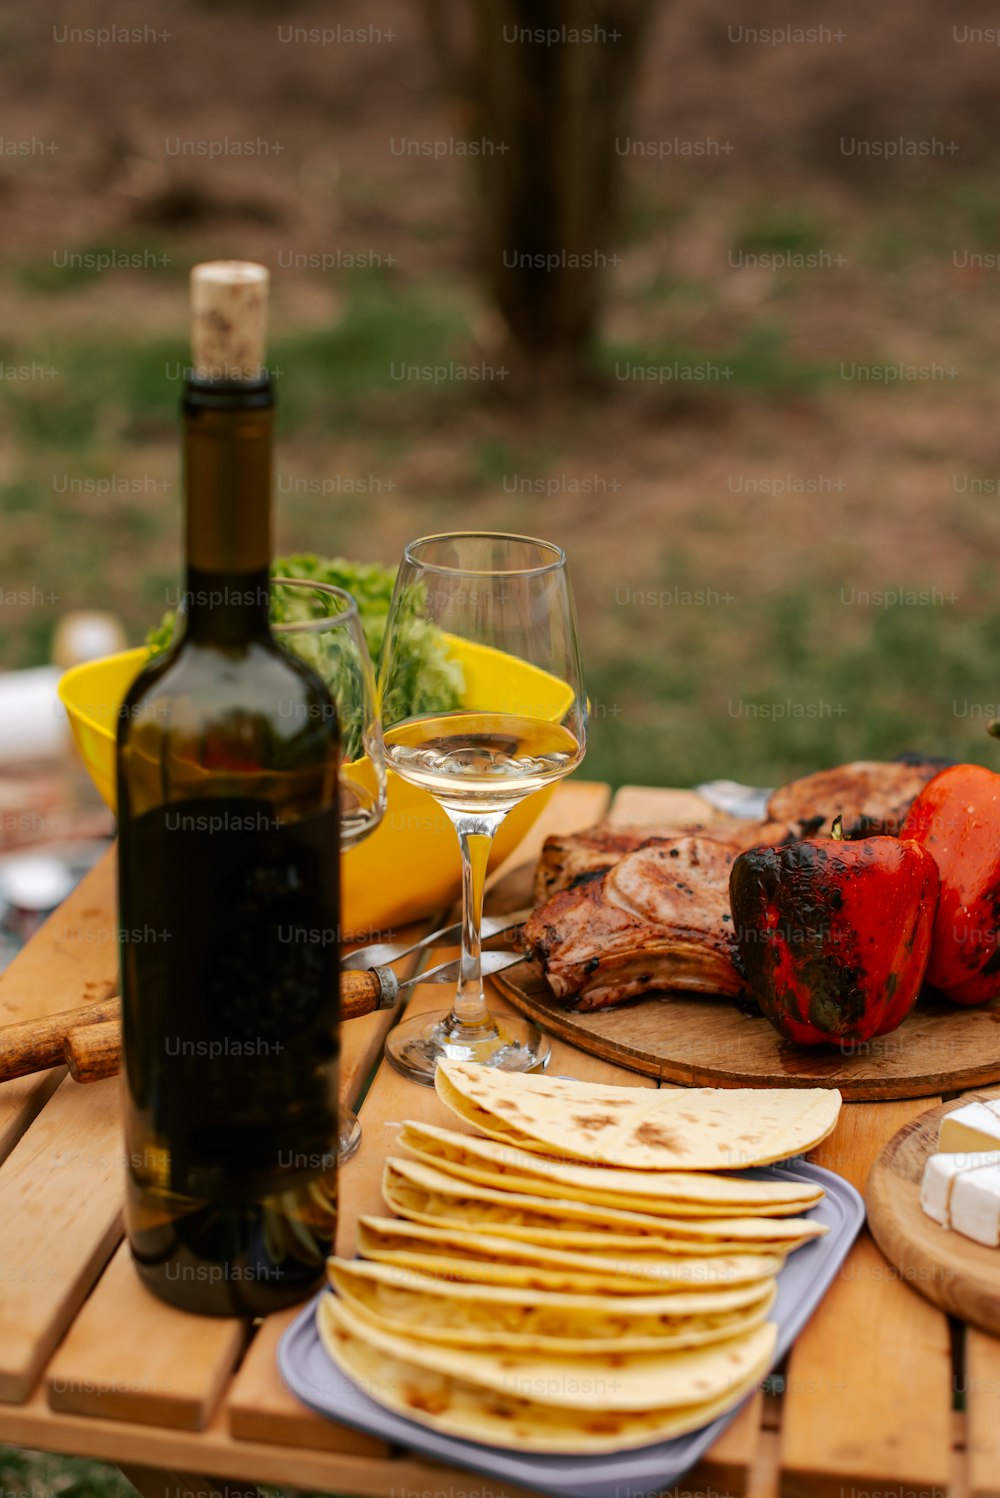 a wooden table topped with plates of food and a bottle of wine